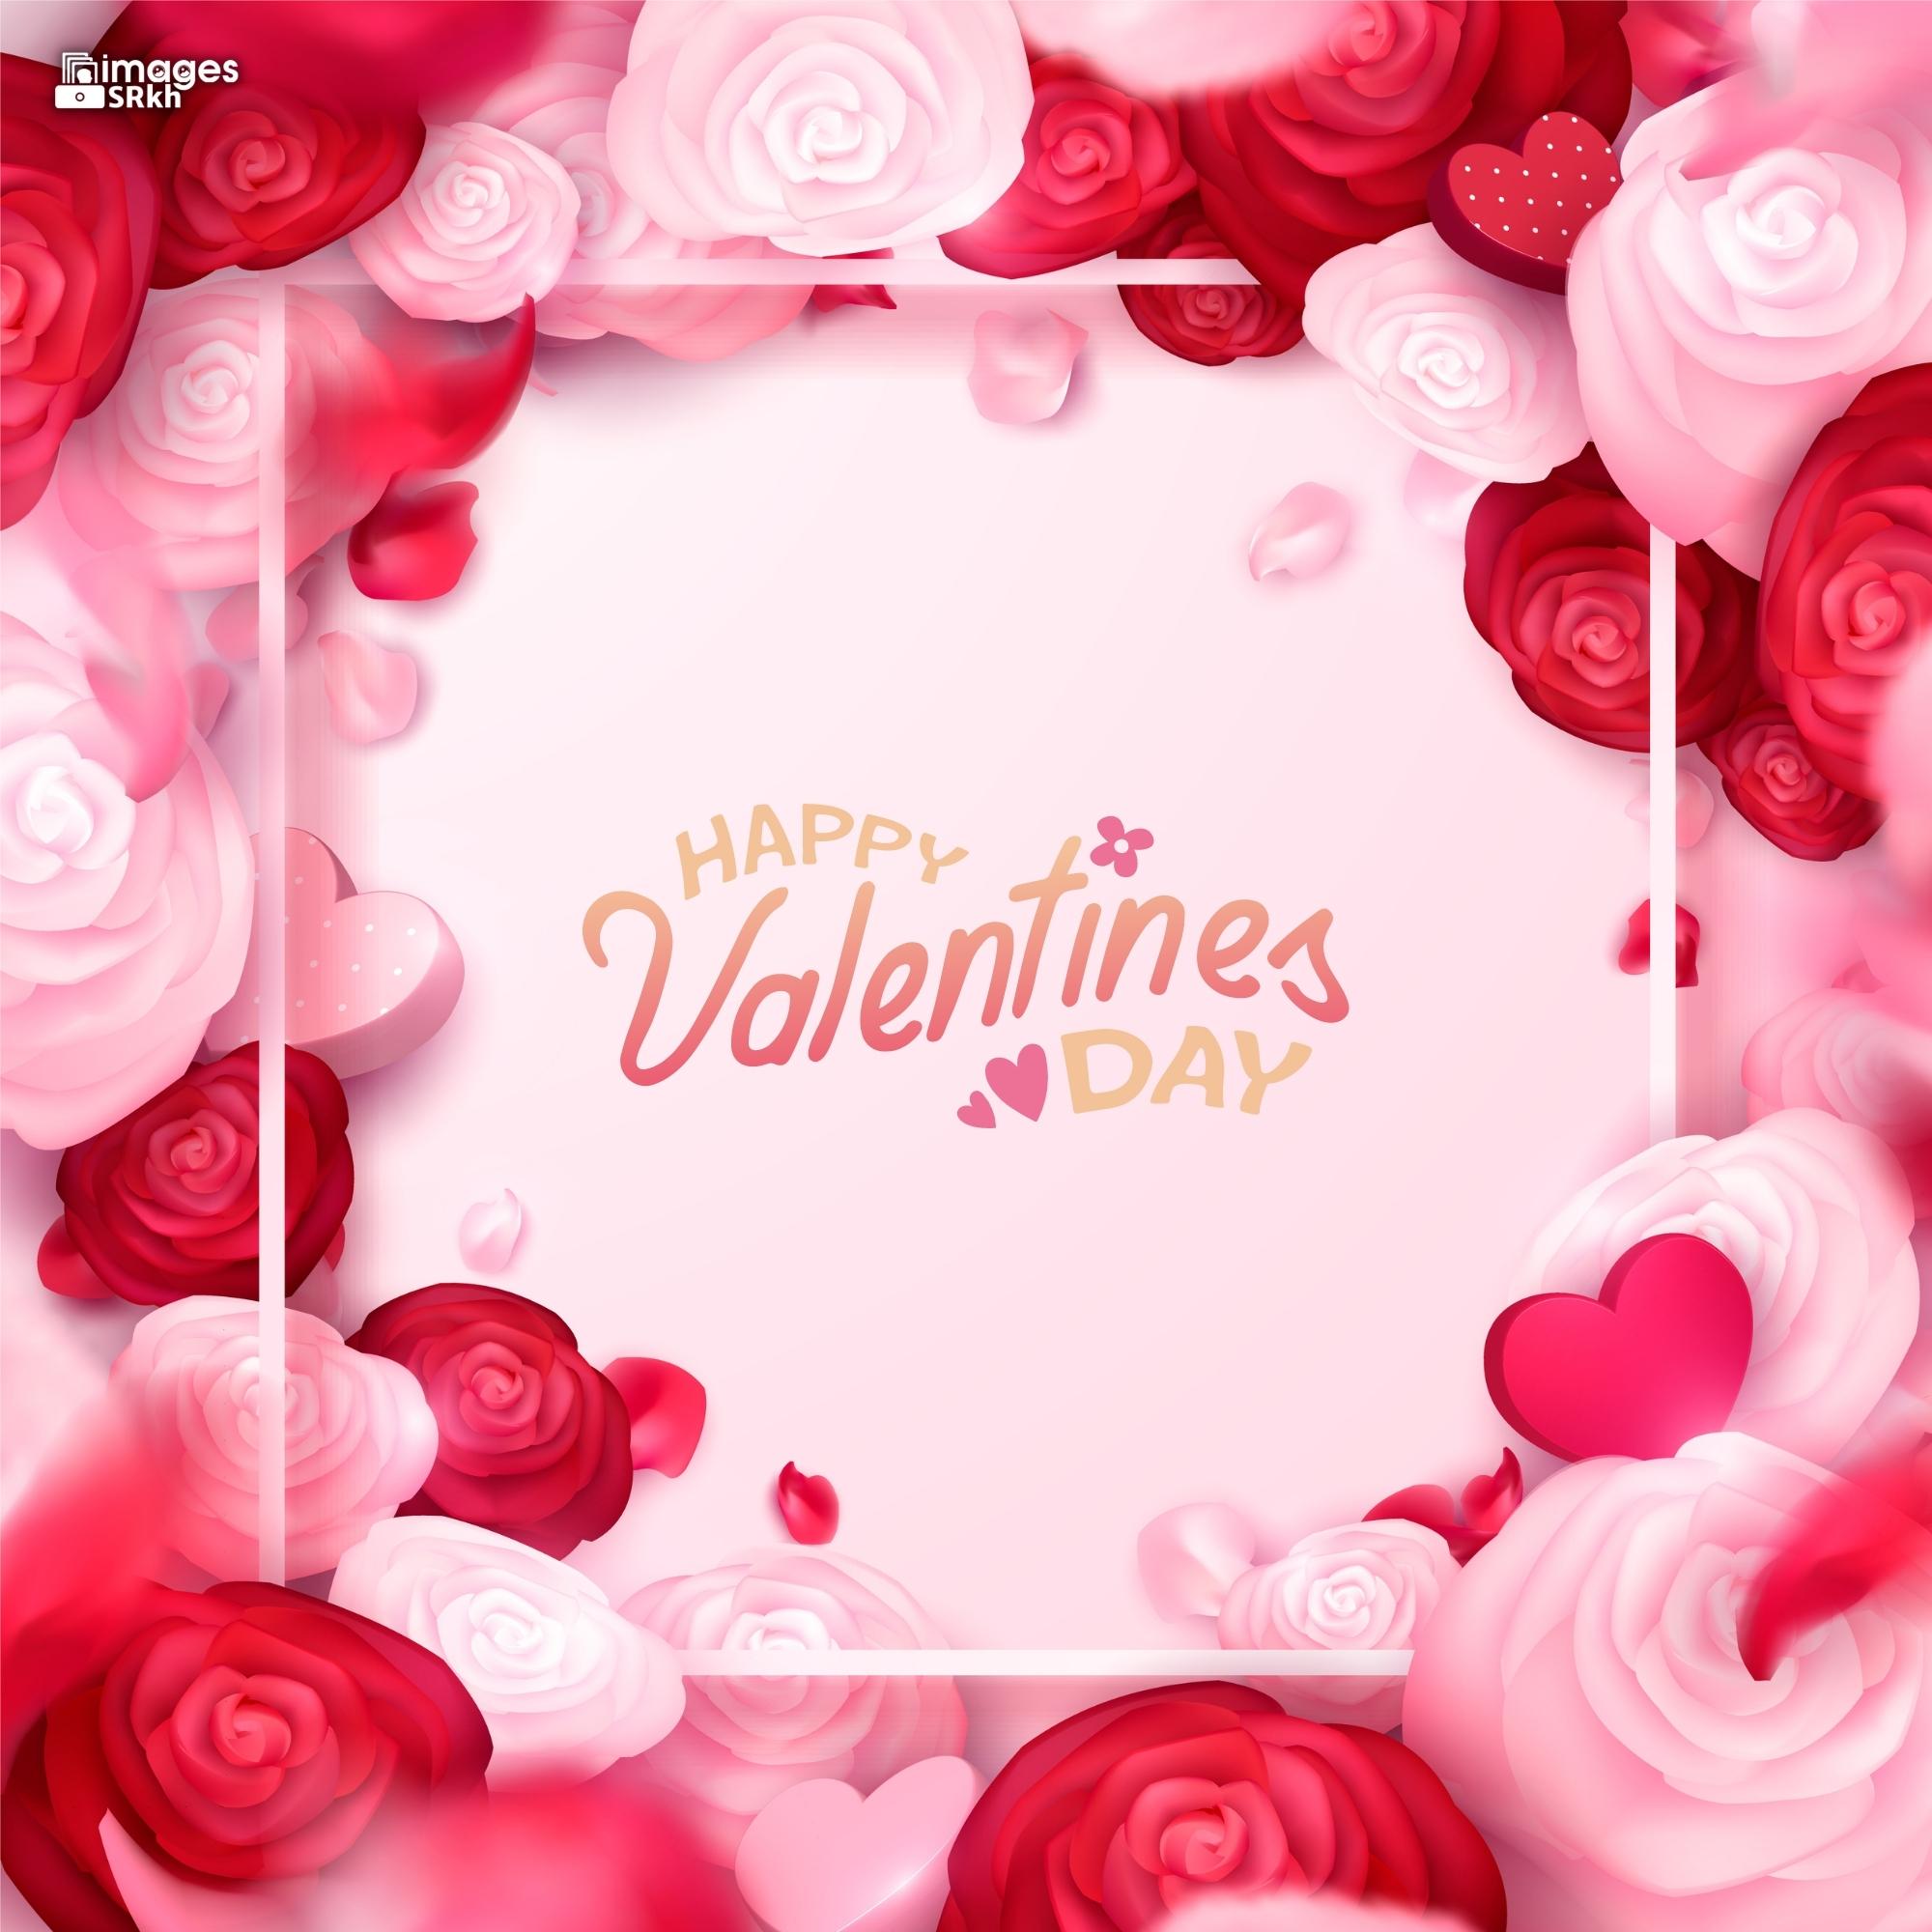 Happy Valentines Day | 529 | PREMIUM IMAGES | Wishes for Love